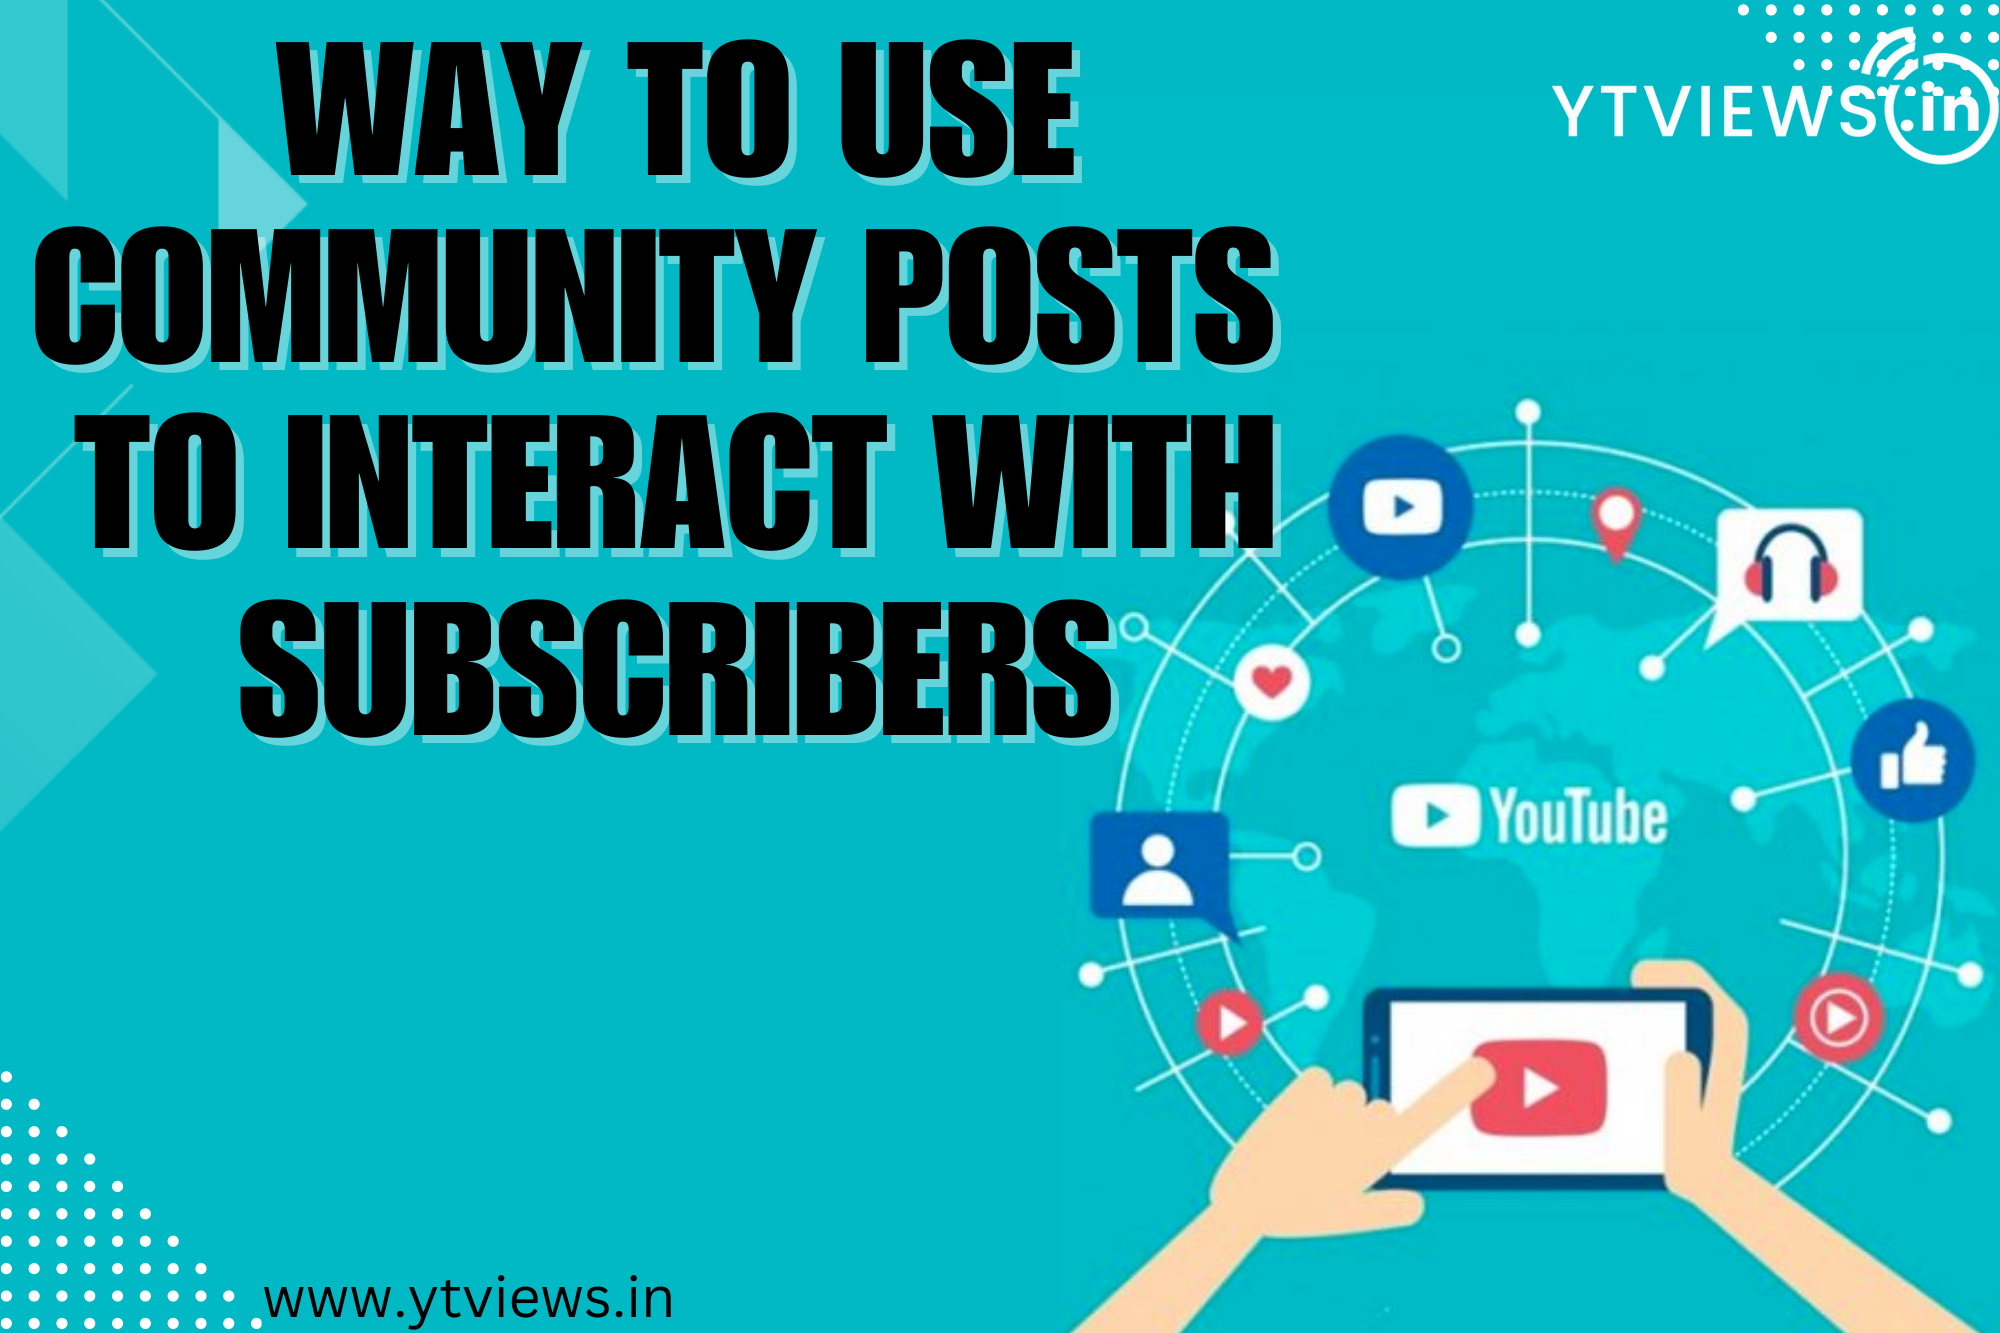 Ways to use community posts to interact with subscribers